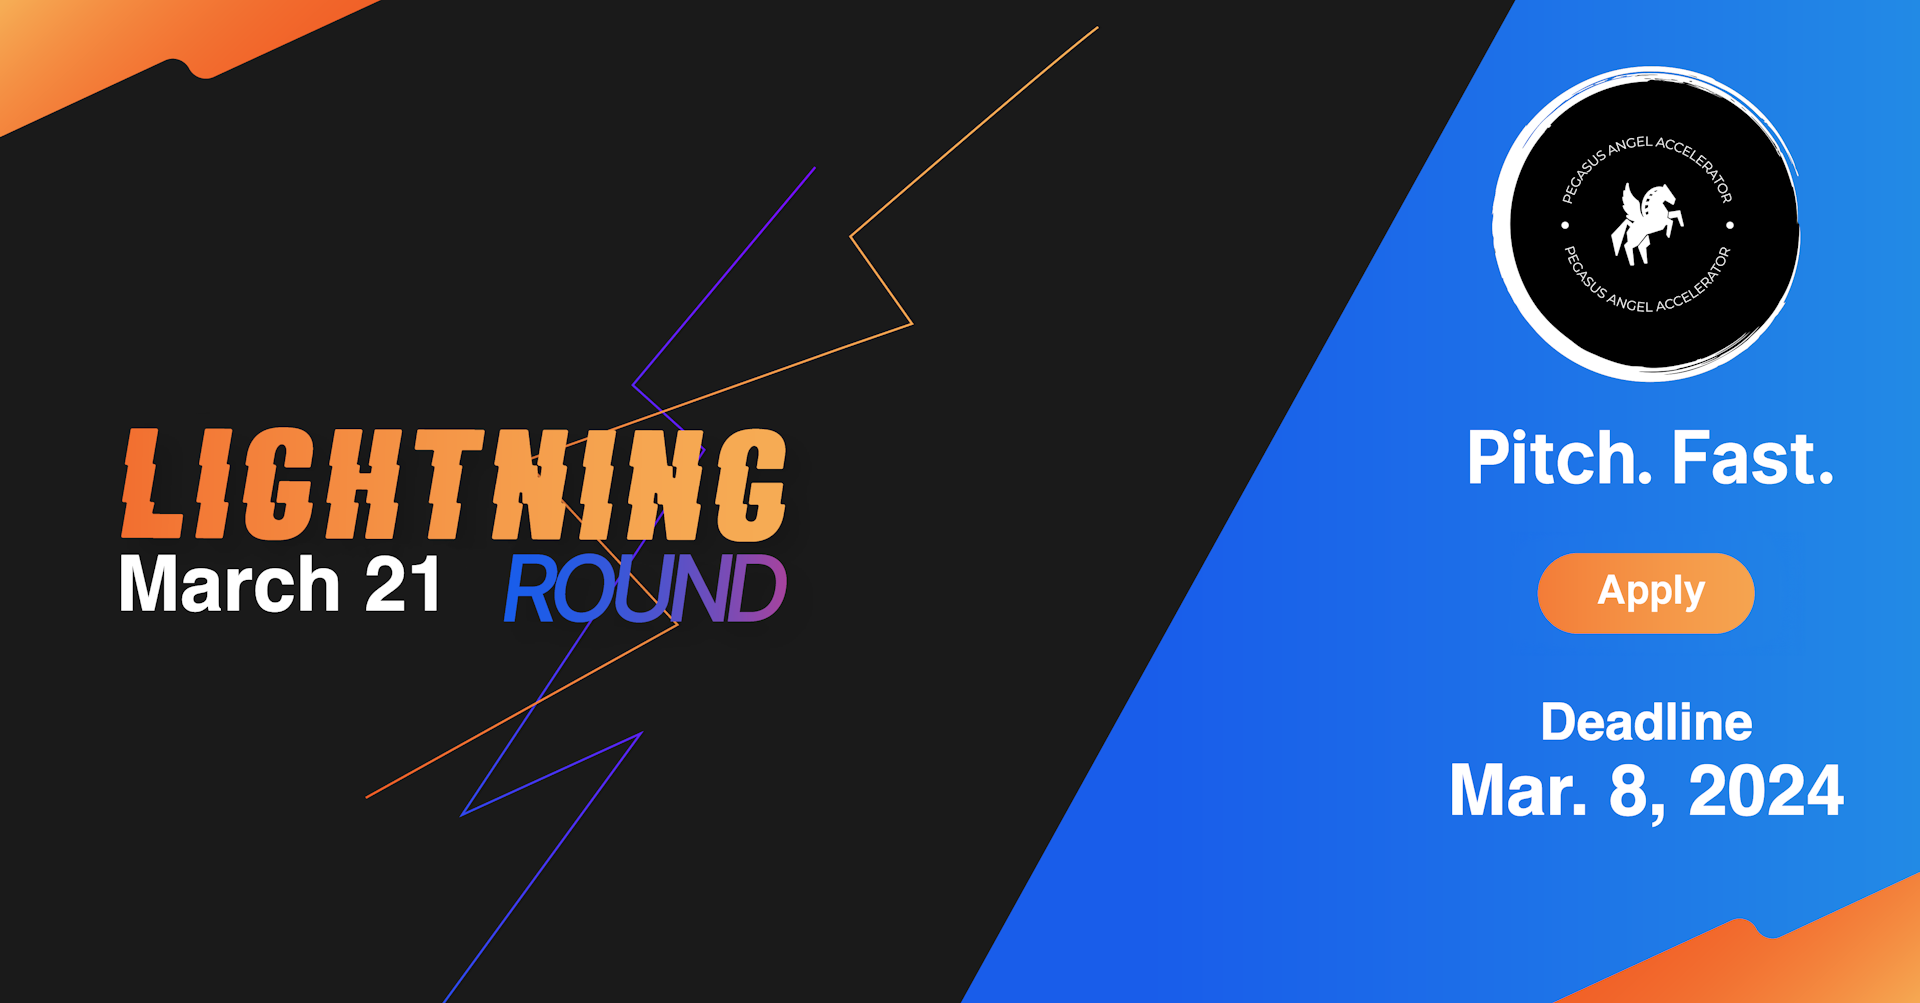 Calling all early stage founders to pitch at the Lighting Round Pitch Competition! 